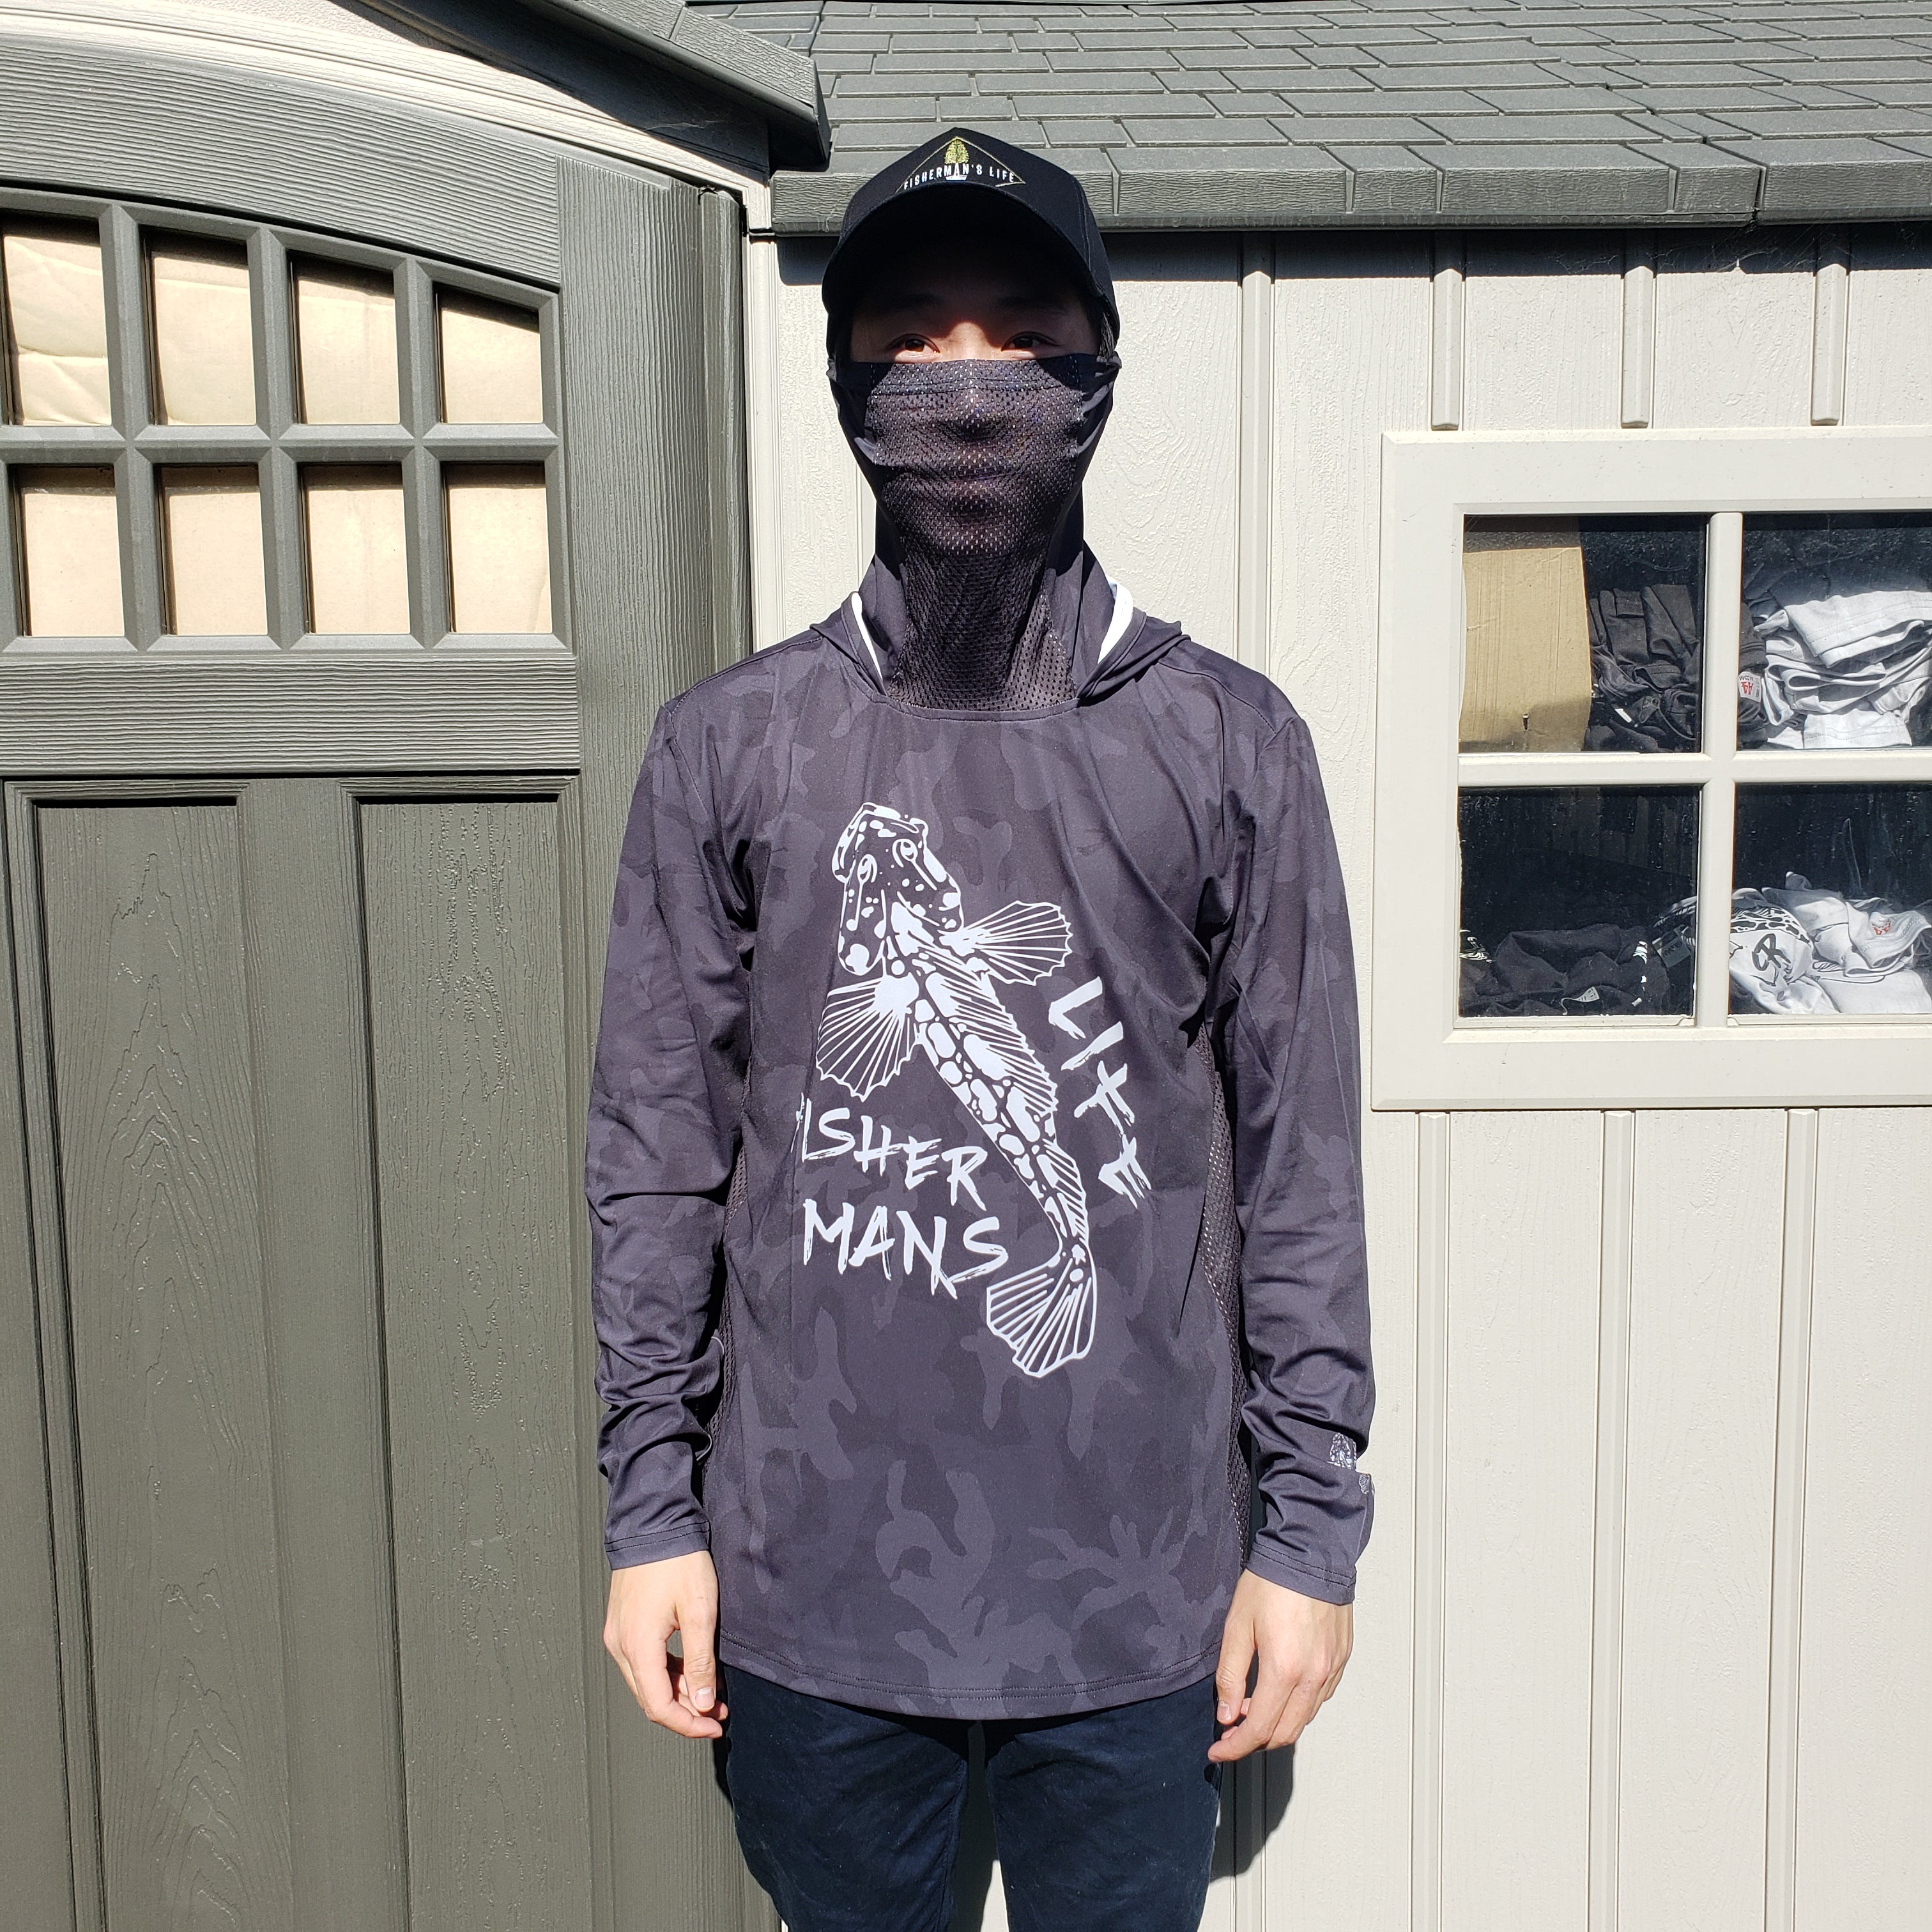 UPF 50+ Long Sleeve Shirt with Hood and Facemask